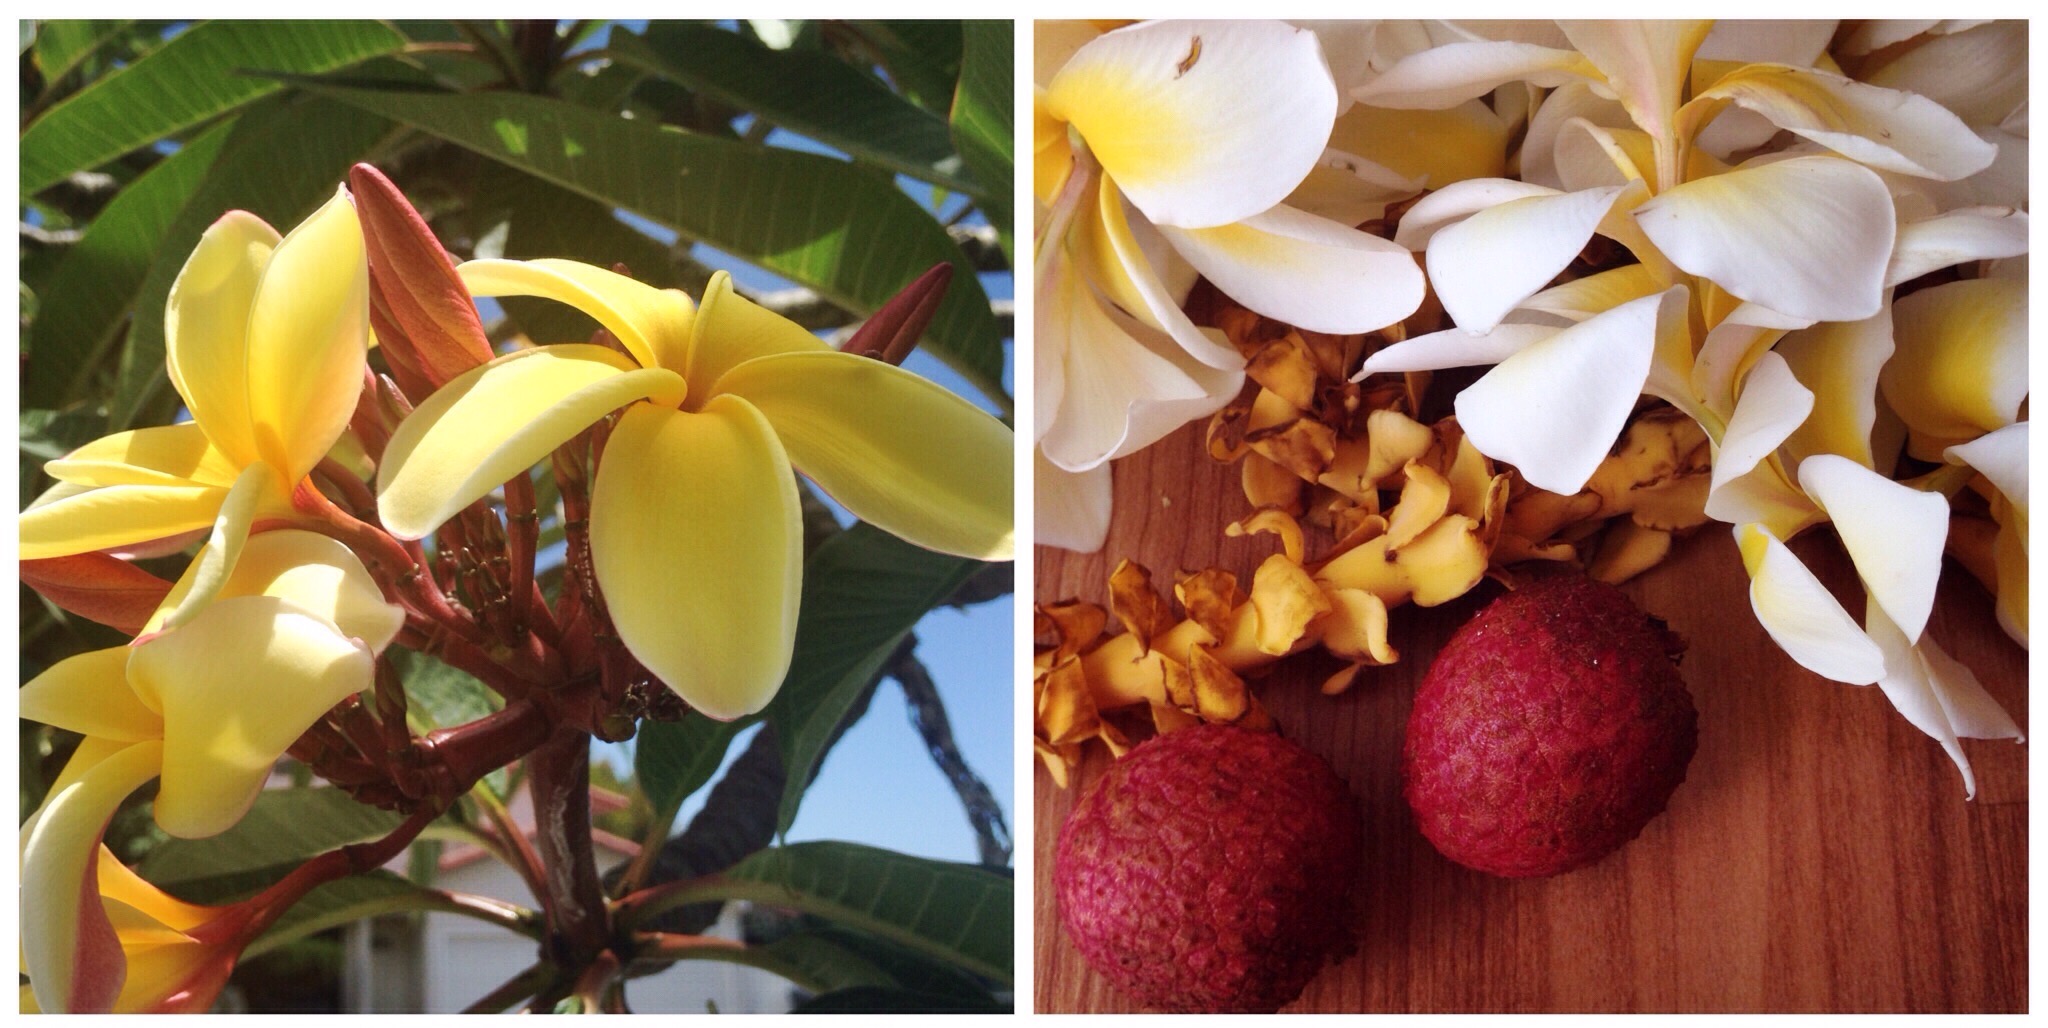  fragrant plumeria trees, leis, and lychees 